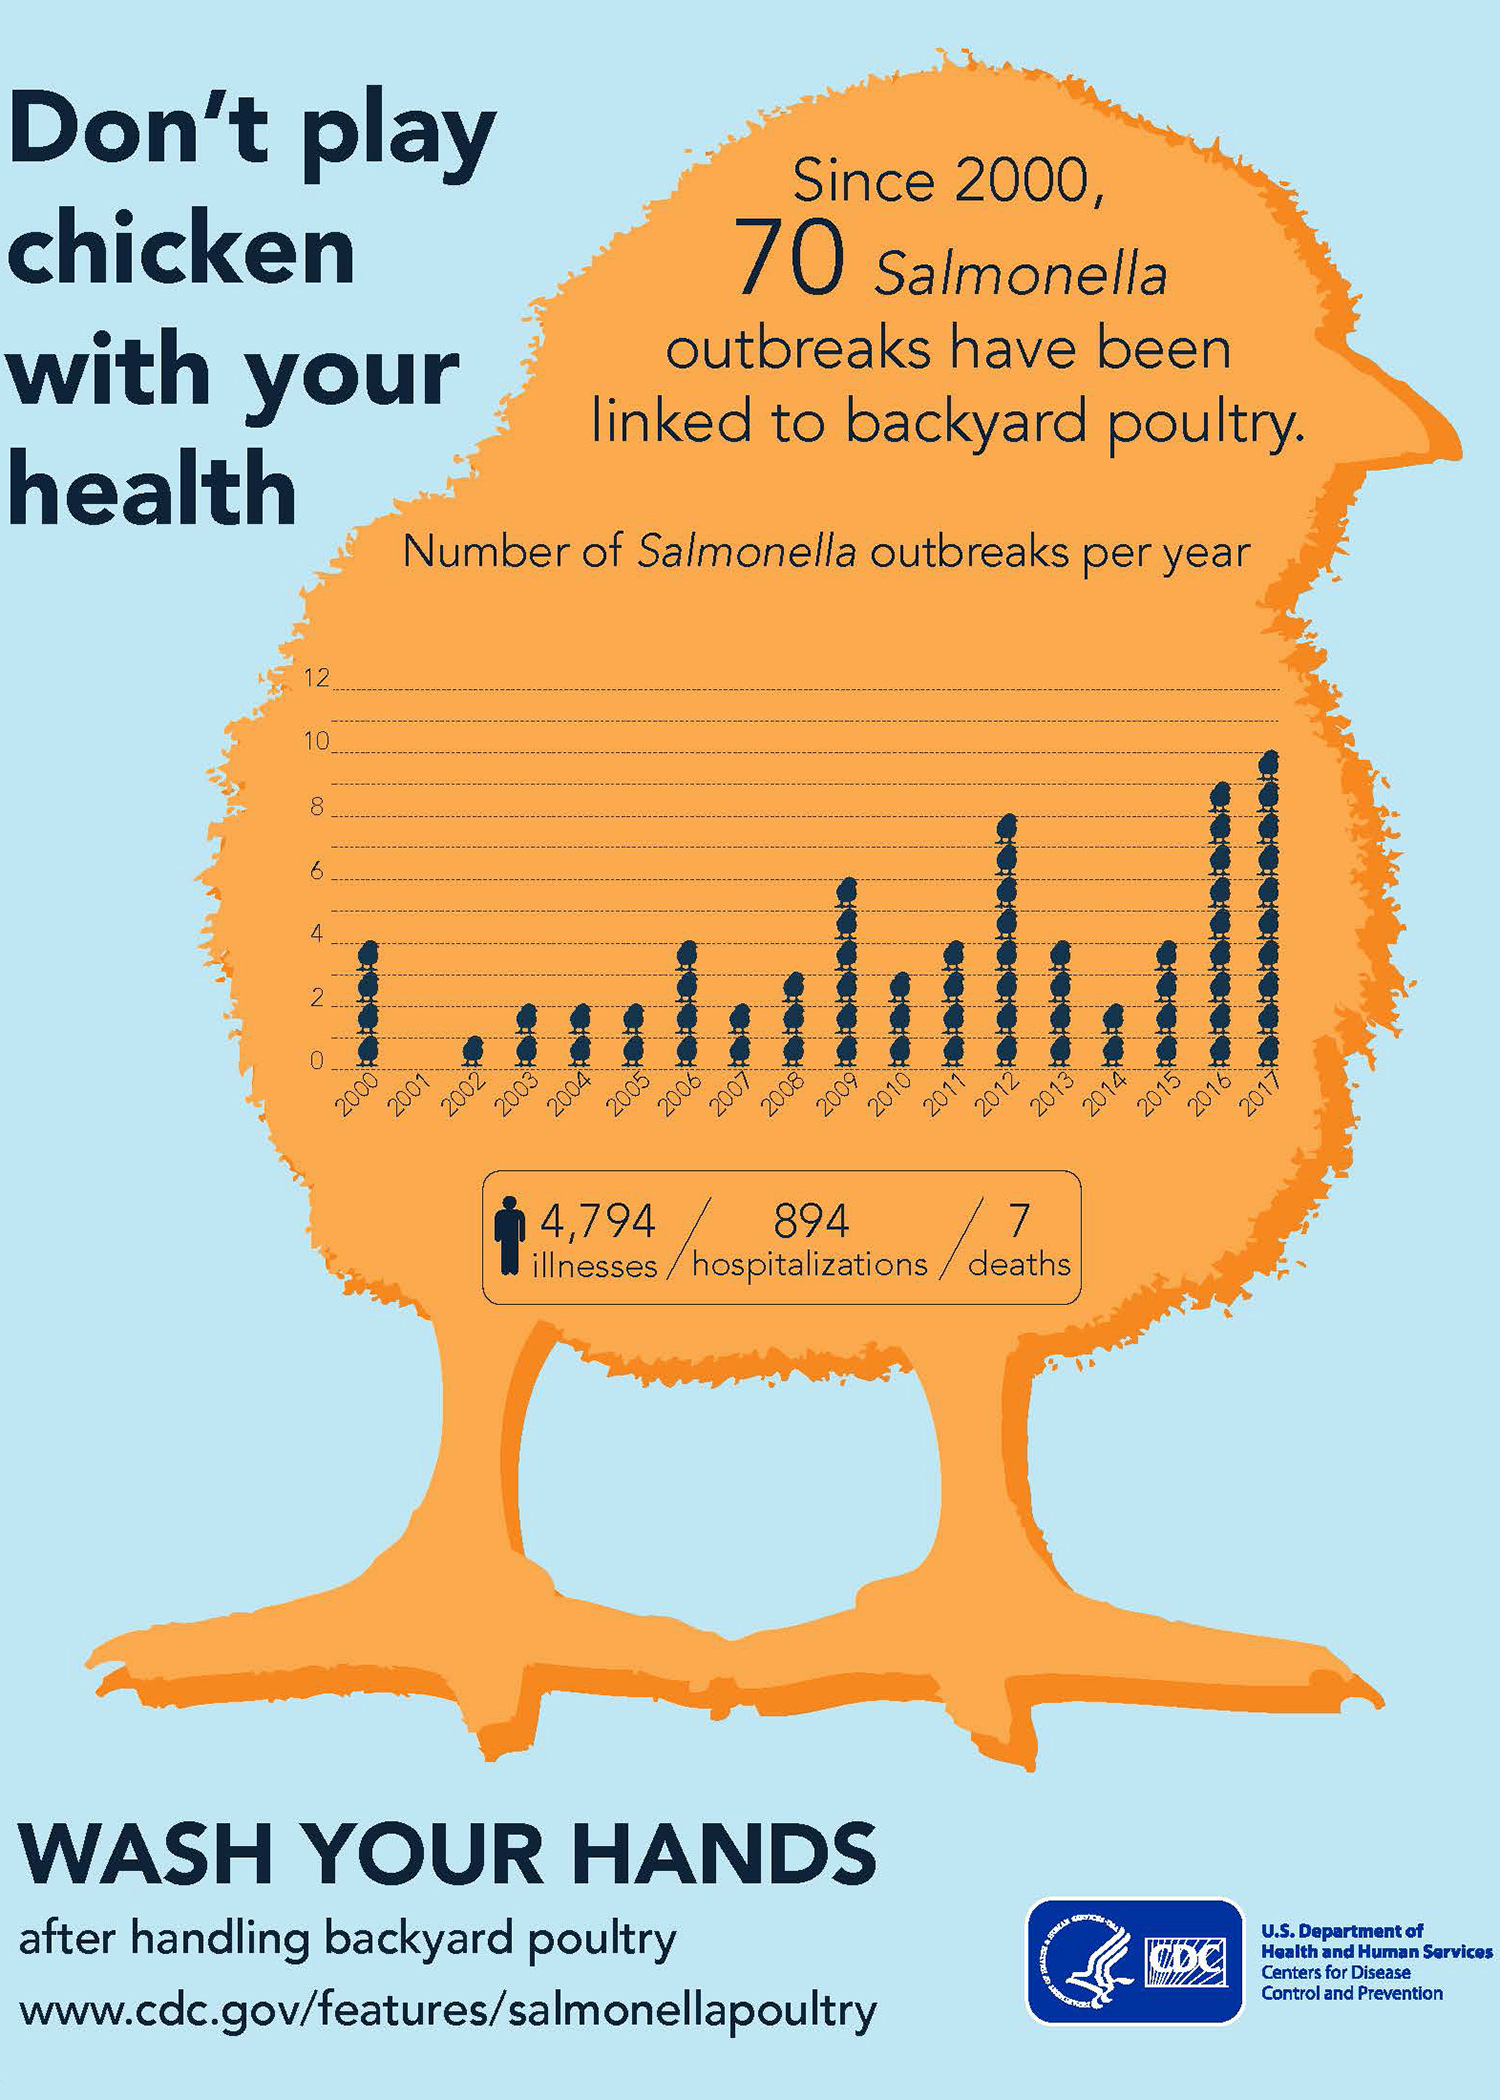 An illustration depicts a large yellow chick with a graph showing the number of Salmonella outbreaks since 2000 and includes text instructions to wash hands after handling backyard poultry. 